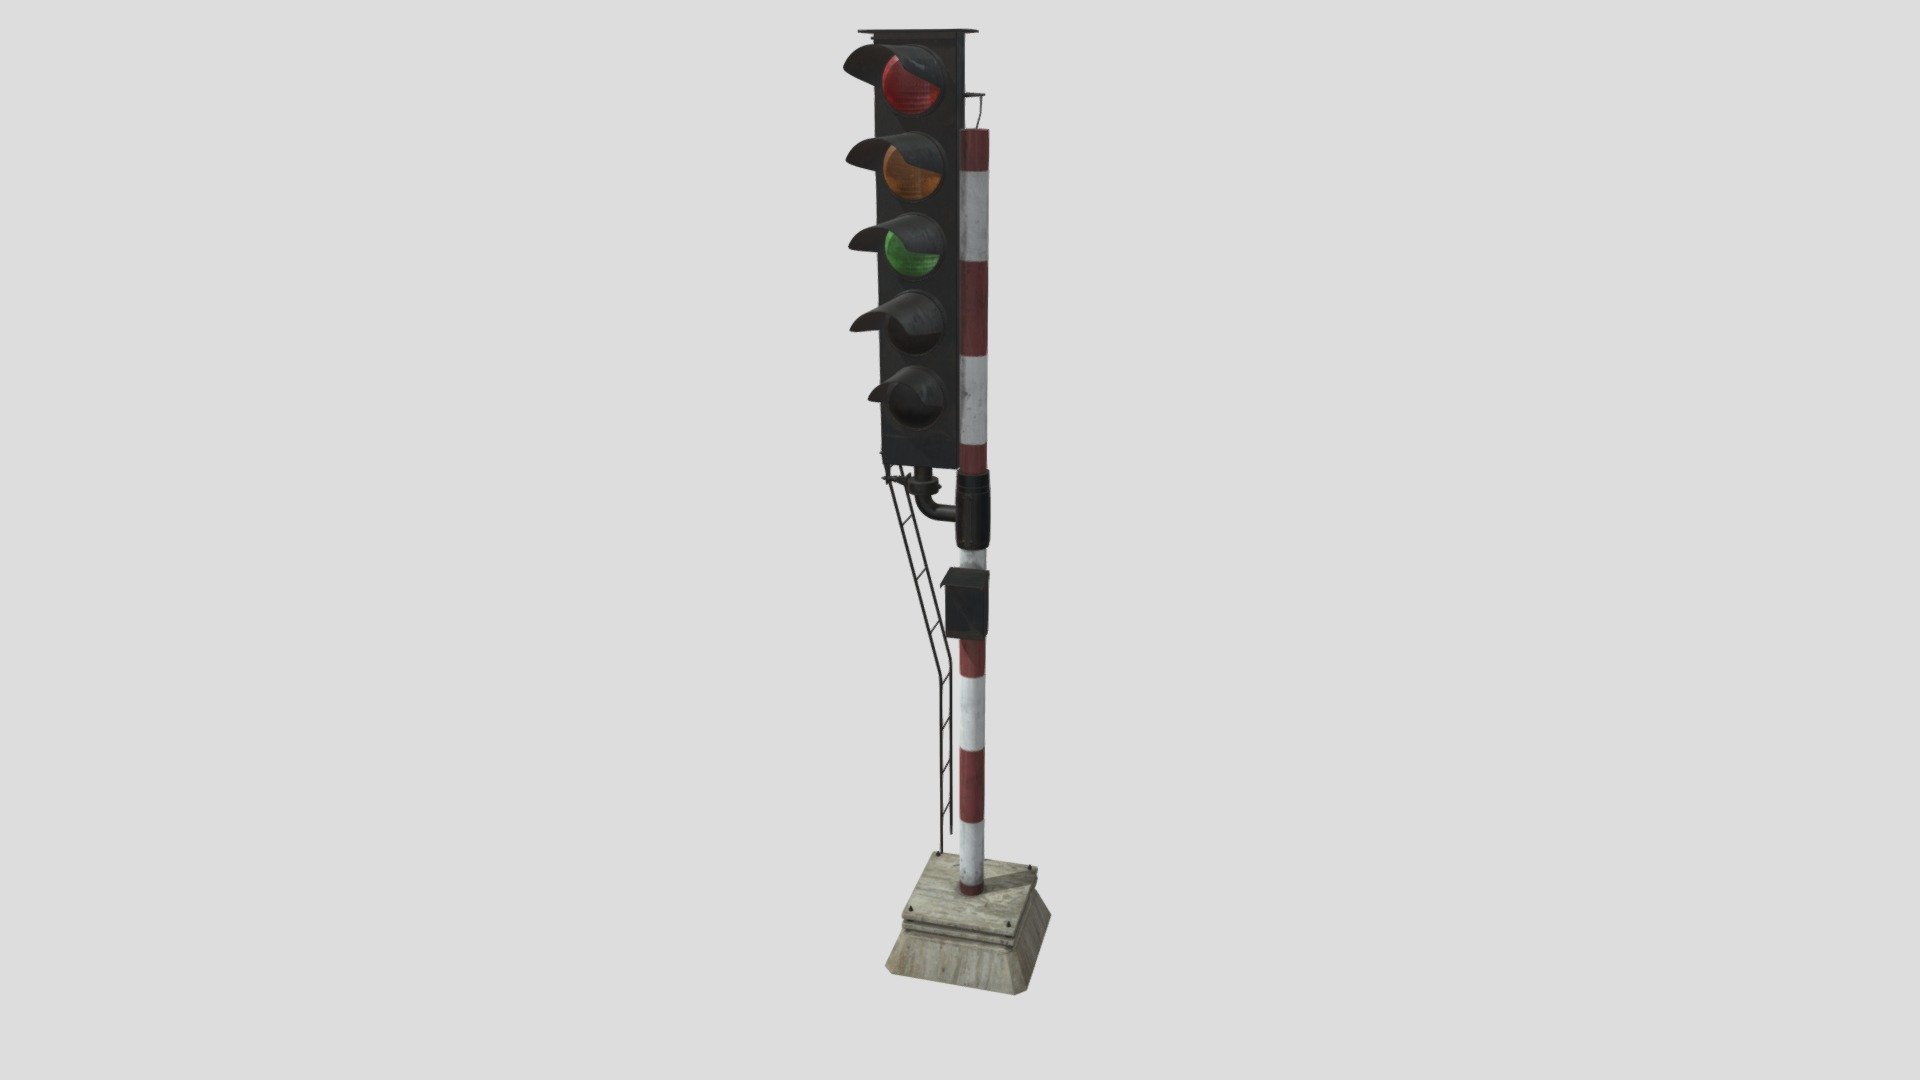 Highly detailed 3d model of railway signal with all textures, shaders and materials. This 3d model is ready to use, just put it into your scene 3d model